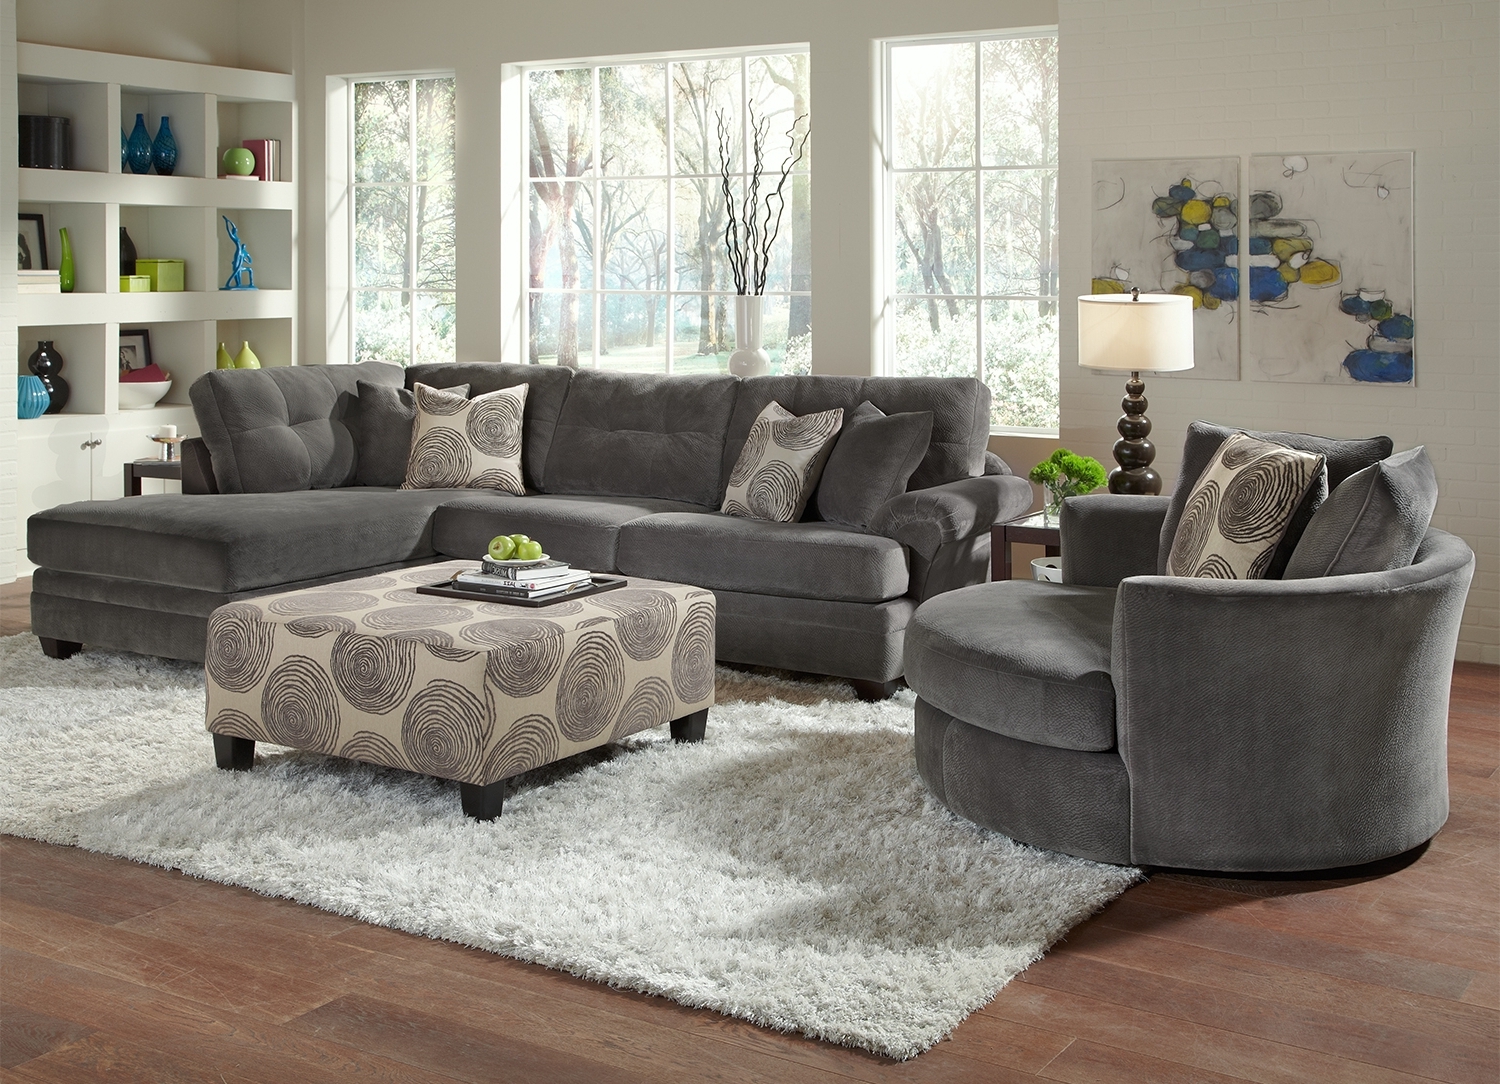 Living Room Layout With 2 Swivel Chairs